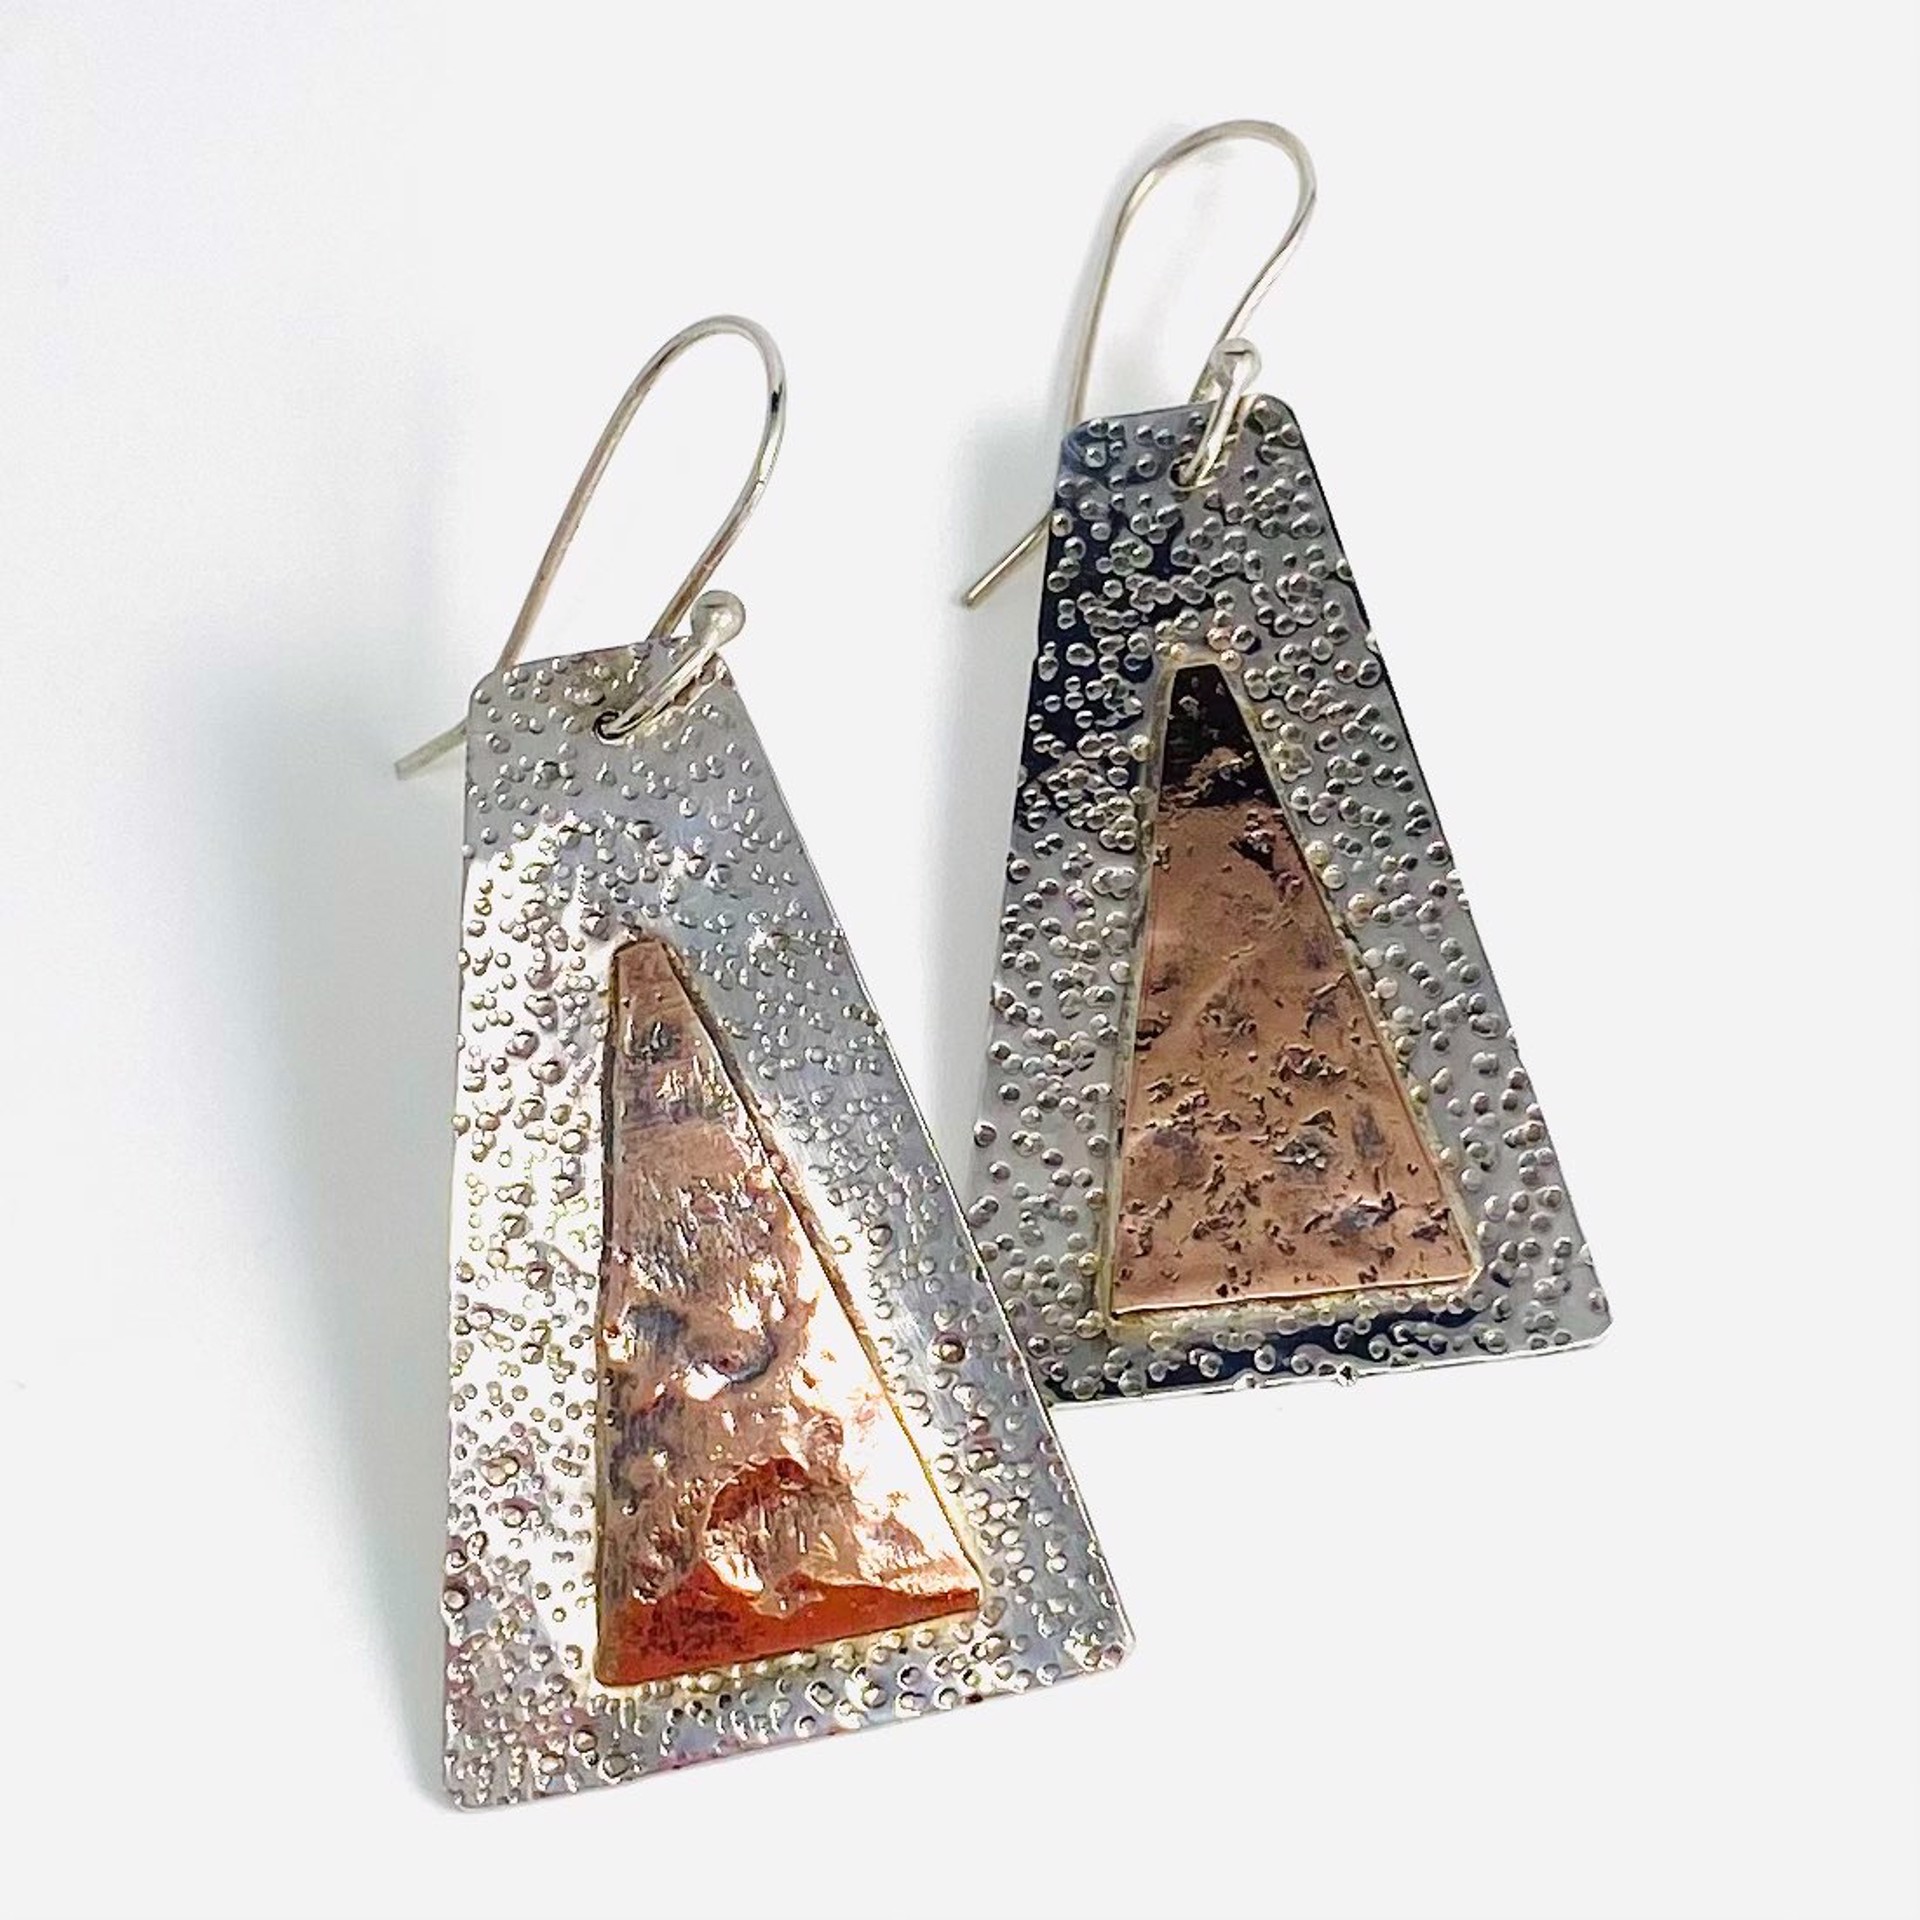 AB20-15 Silver and Copper Hammered Earrings (970 earwire) by Anne Bivens